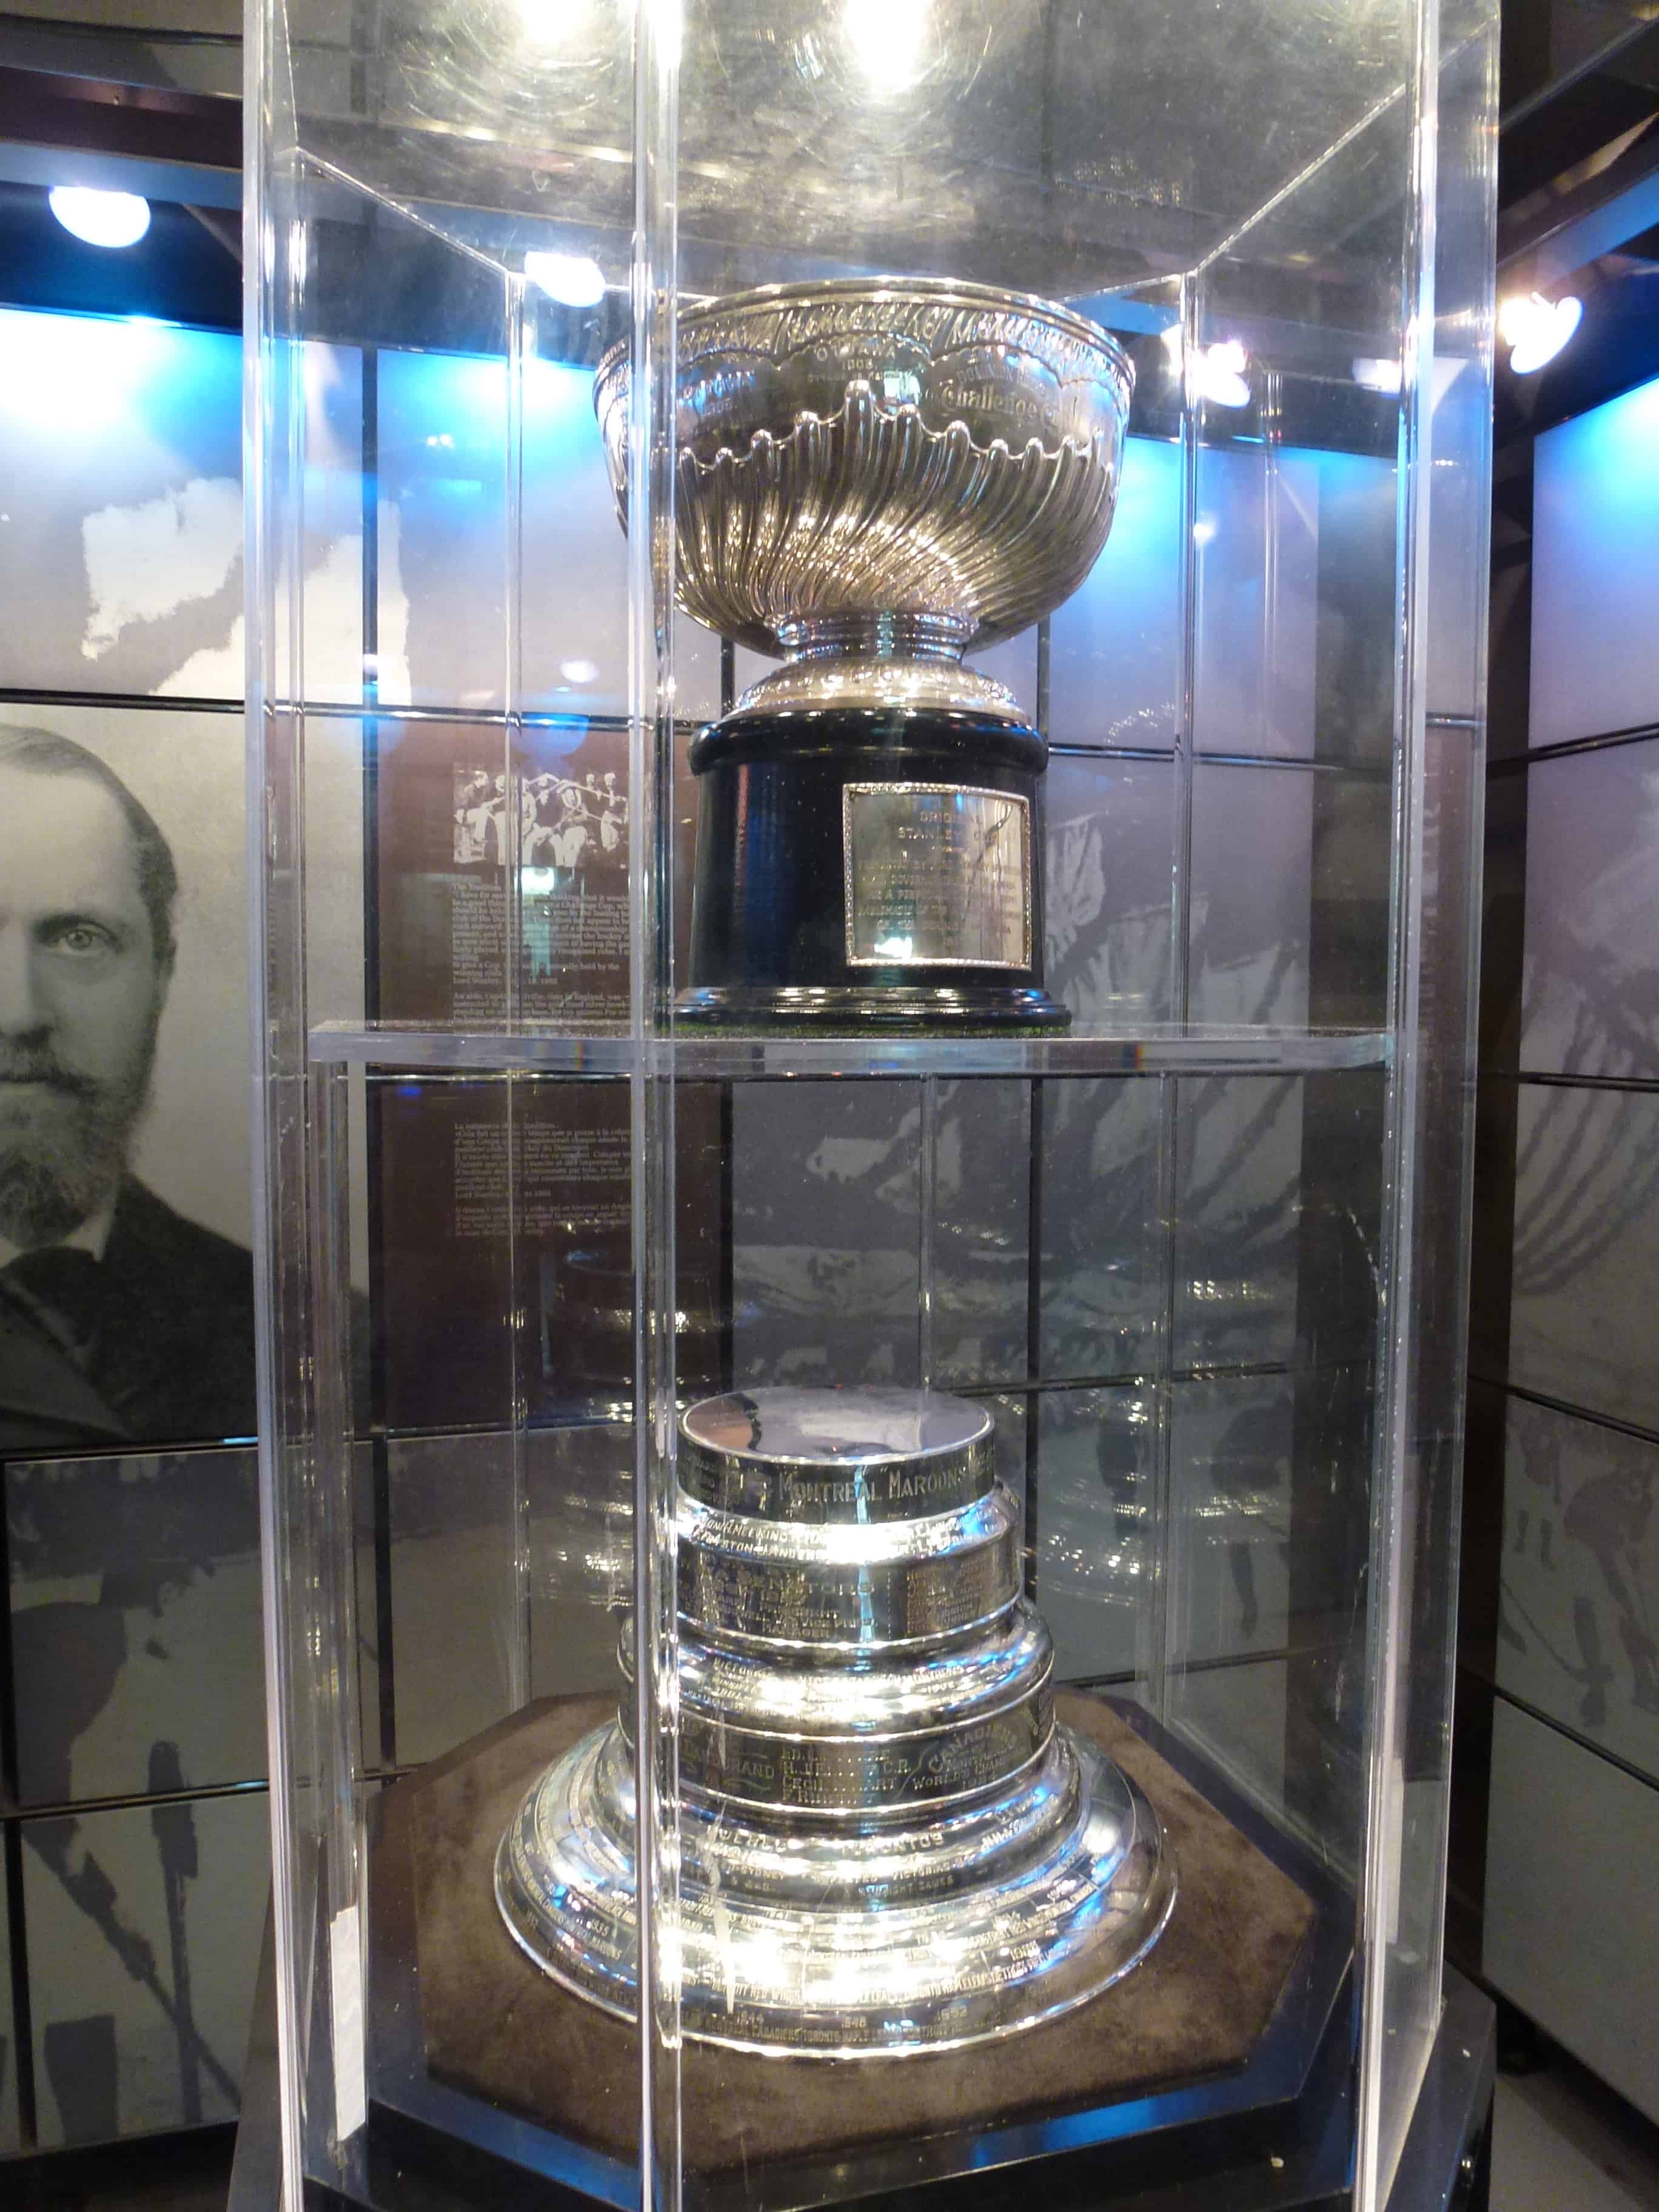 Original Stanley Cup at the Hockey Hall of Fame in Toronto, Ontario, Canada